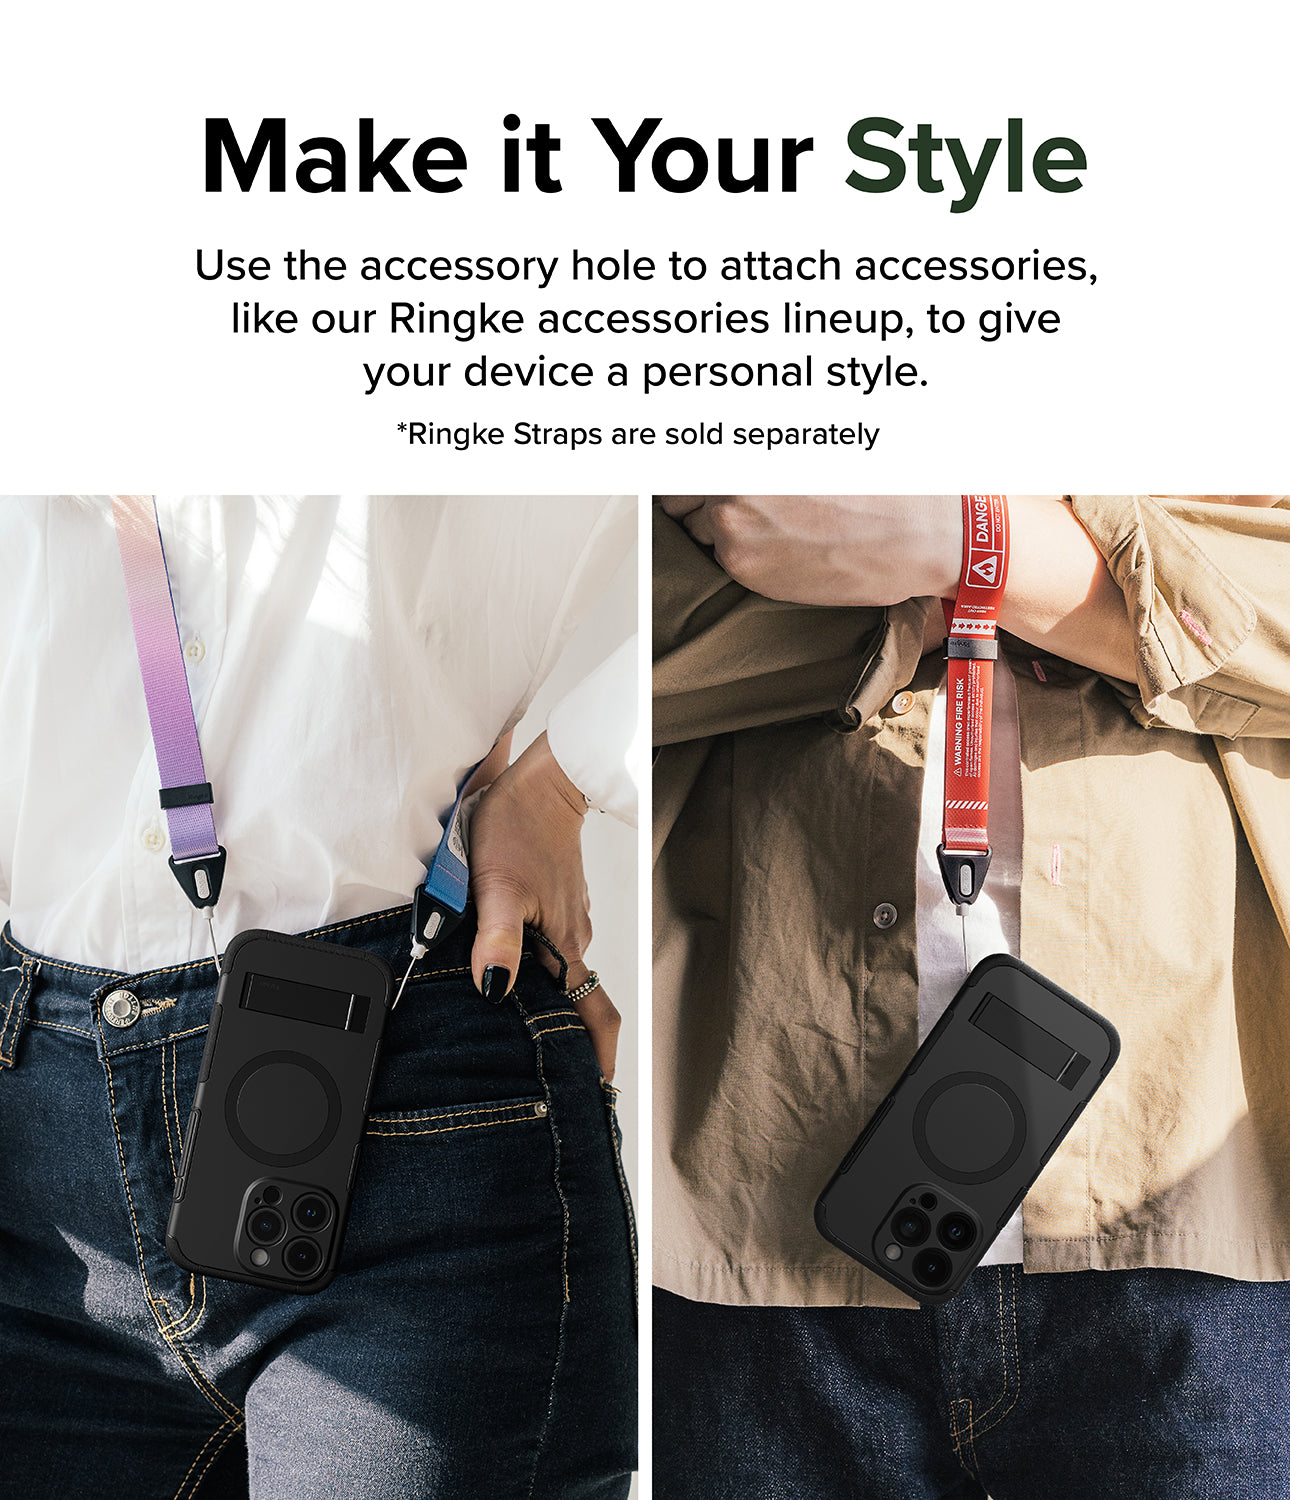 iPhone 15 Pro Max Case | Alles - Make it Your Style. Use the accessory hole to attach accessories, like our Ringke accessories lineup, to give your device a personal style.